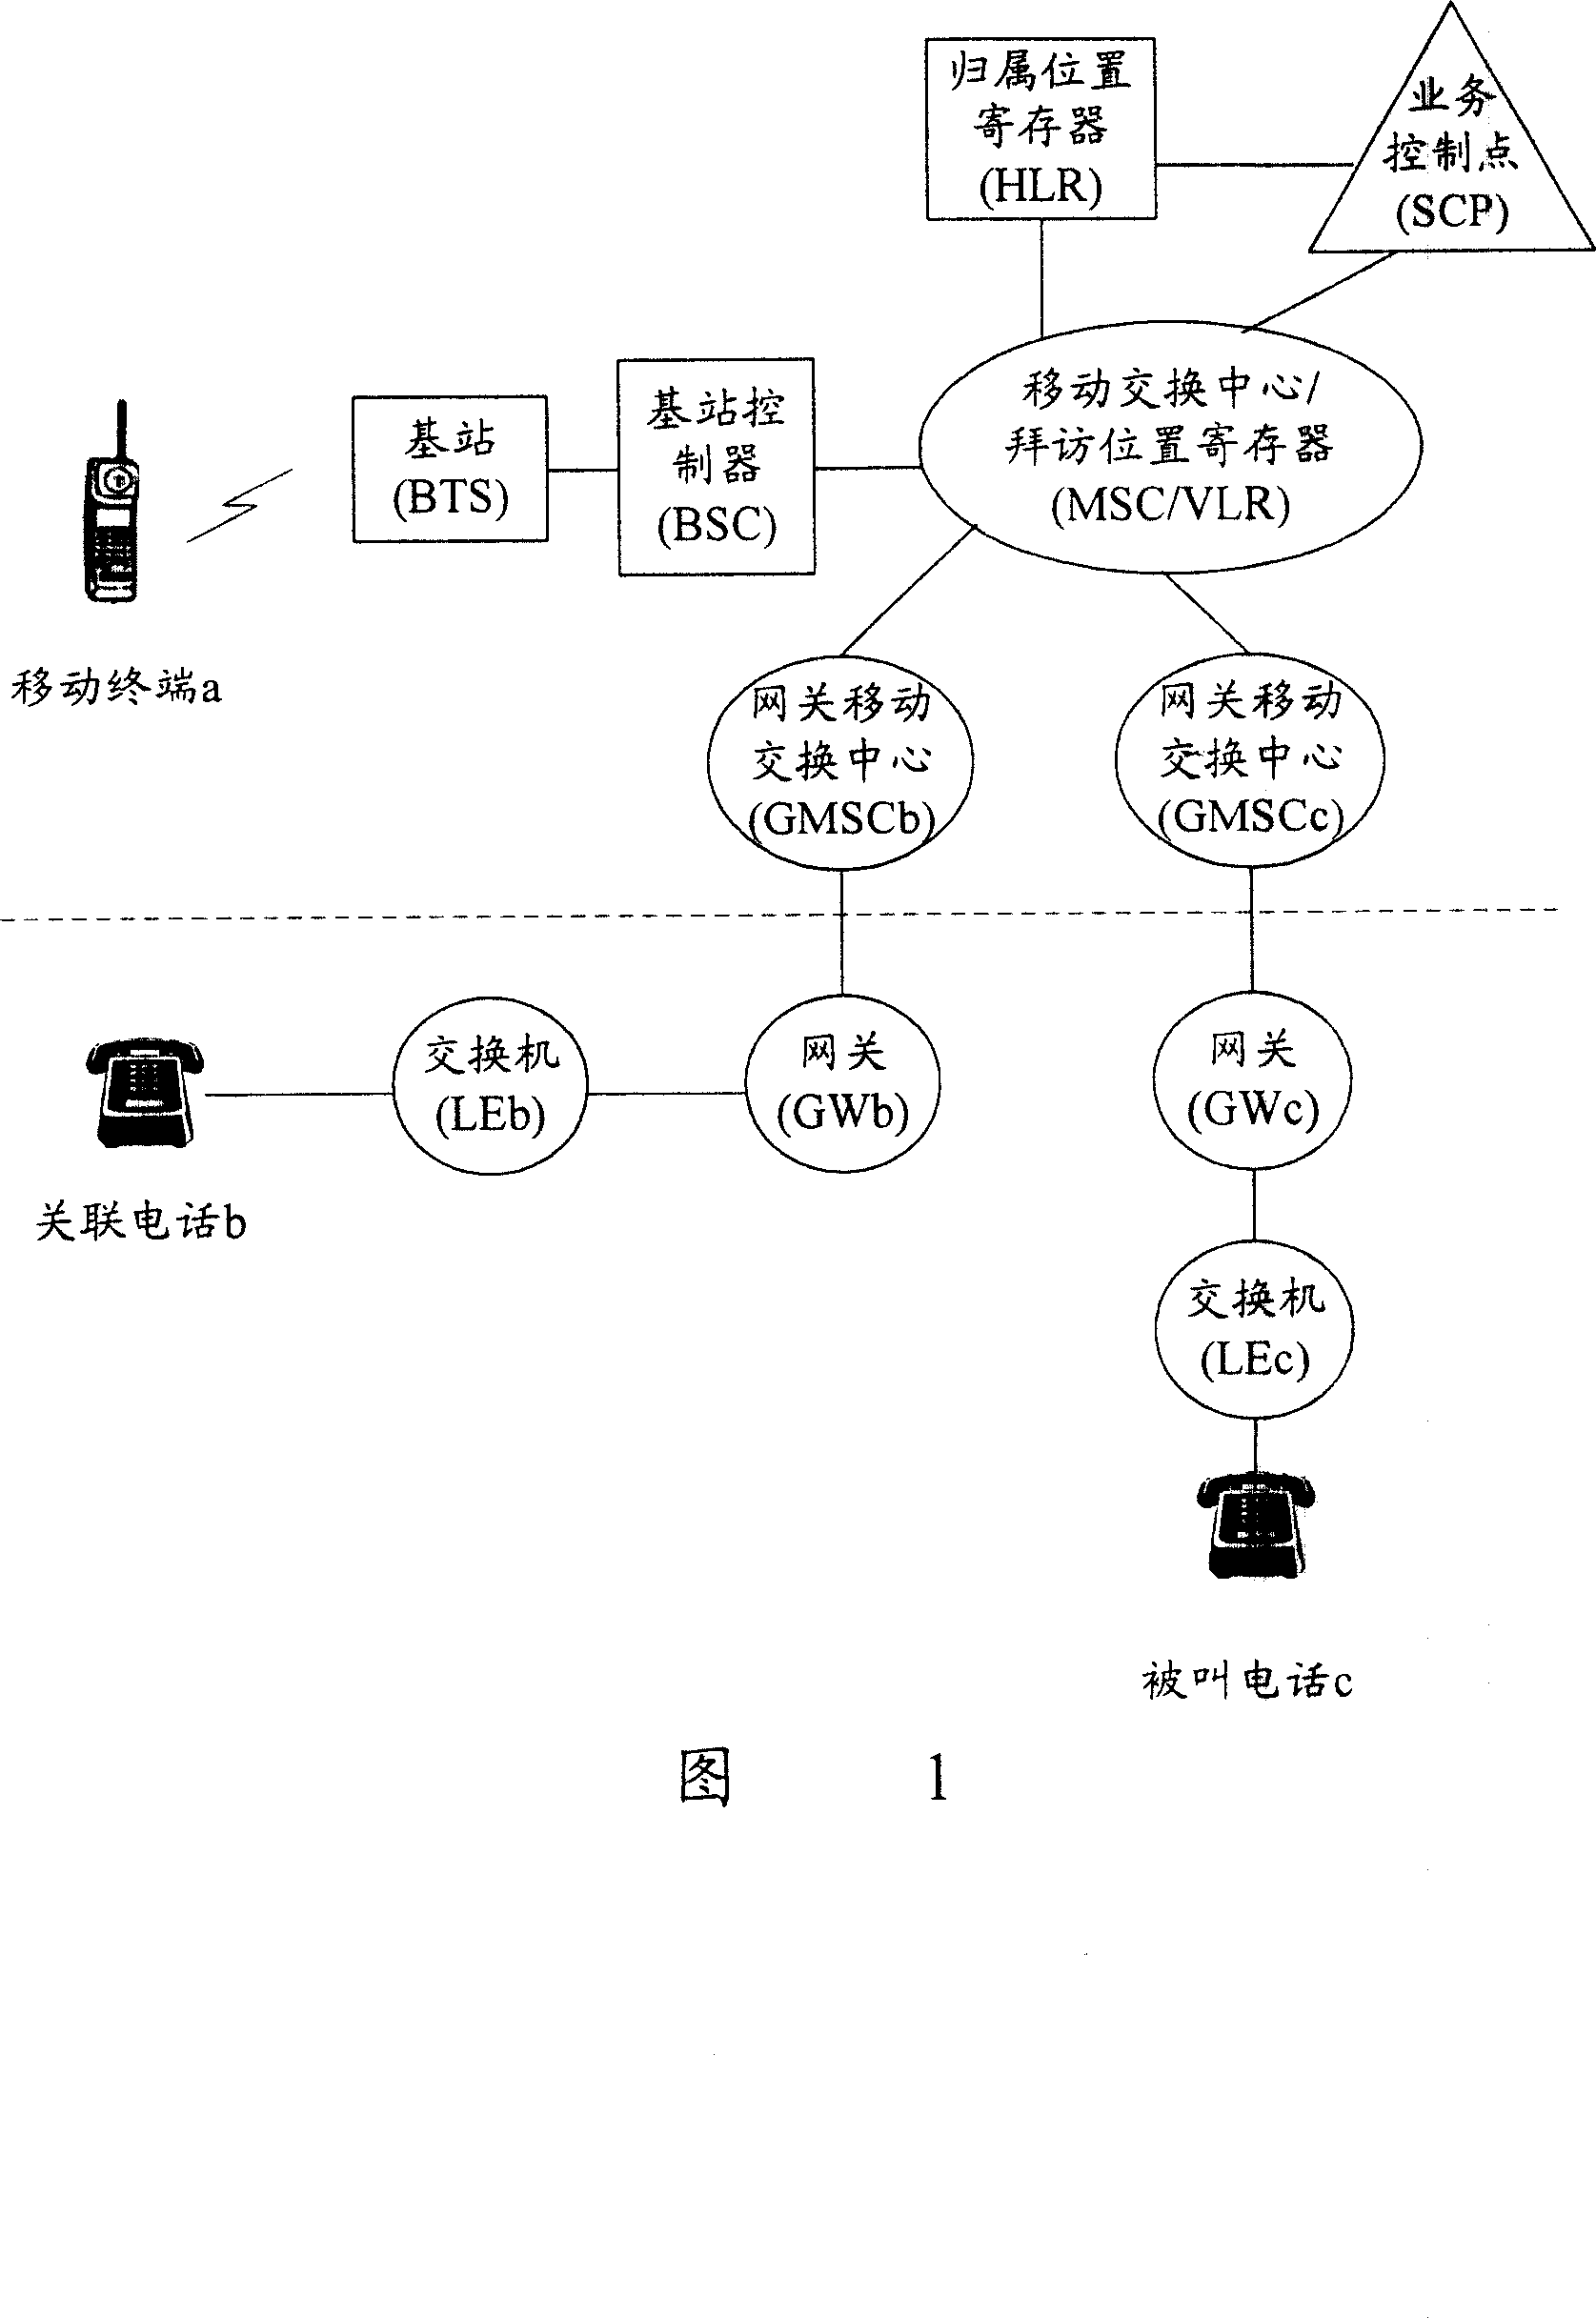 Associated telephone calling method and its telecommunication system